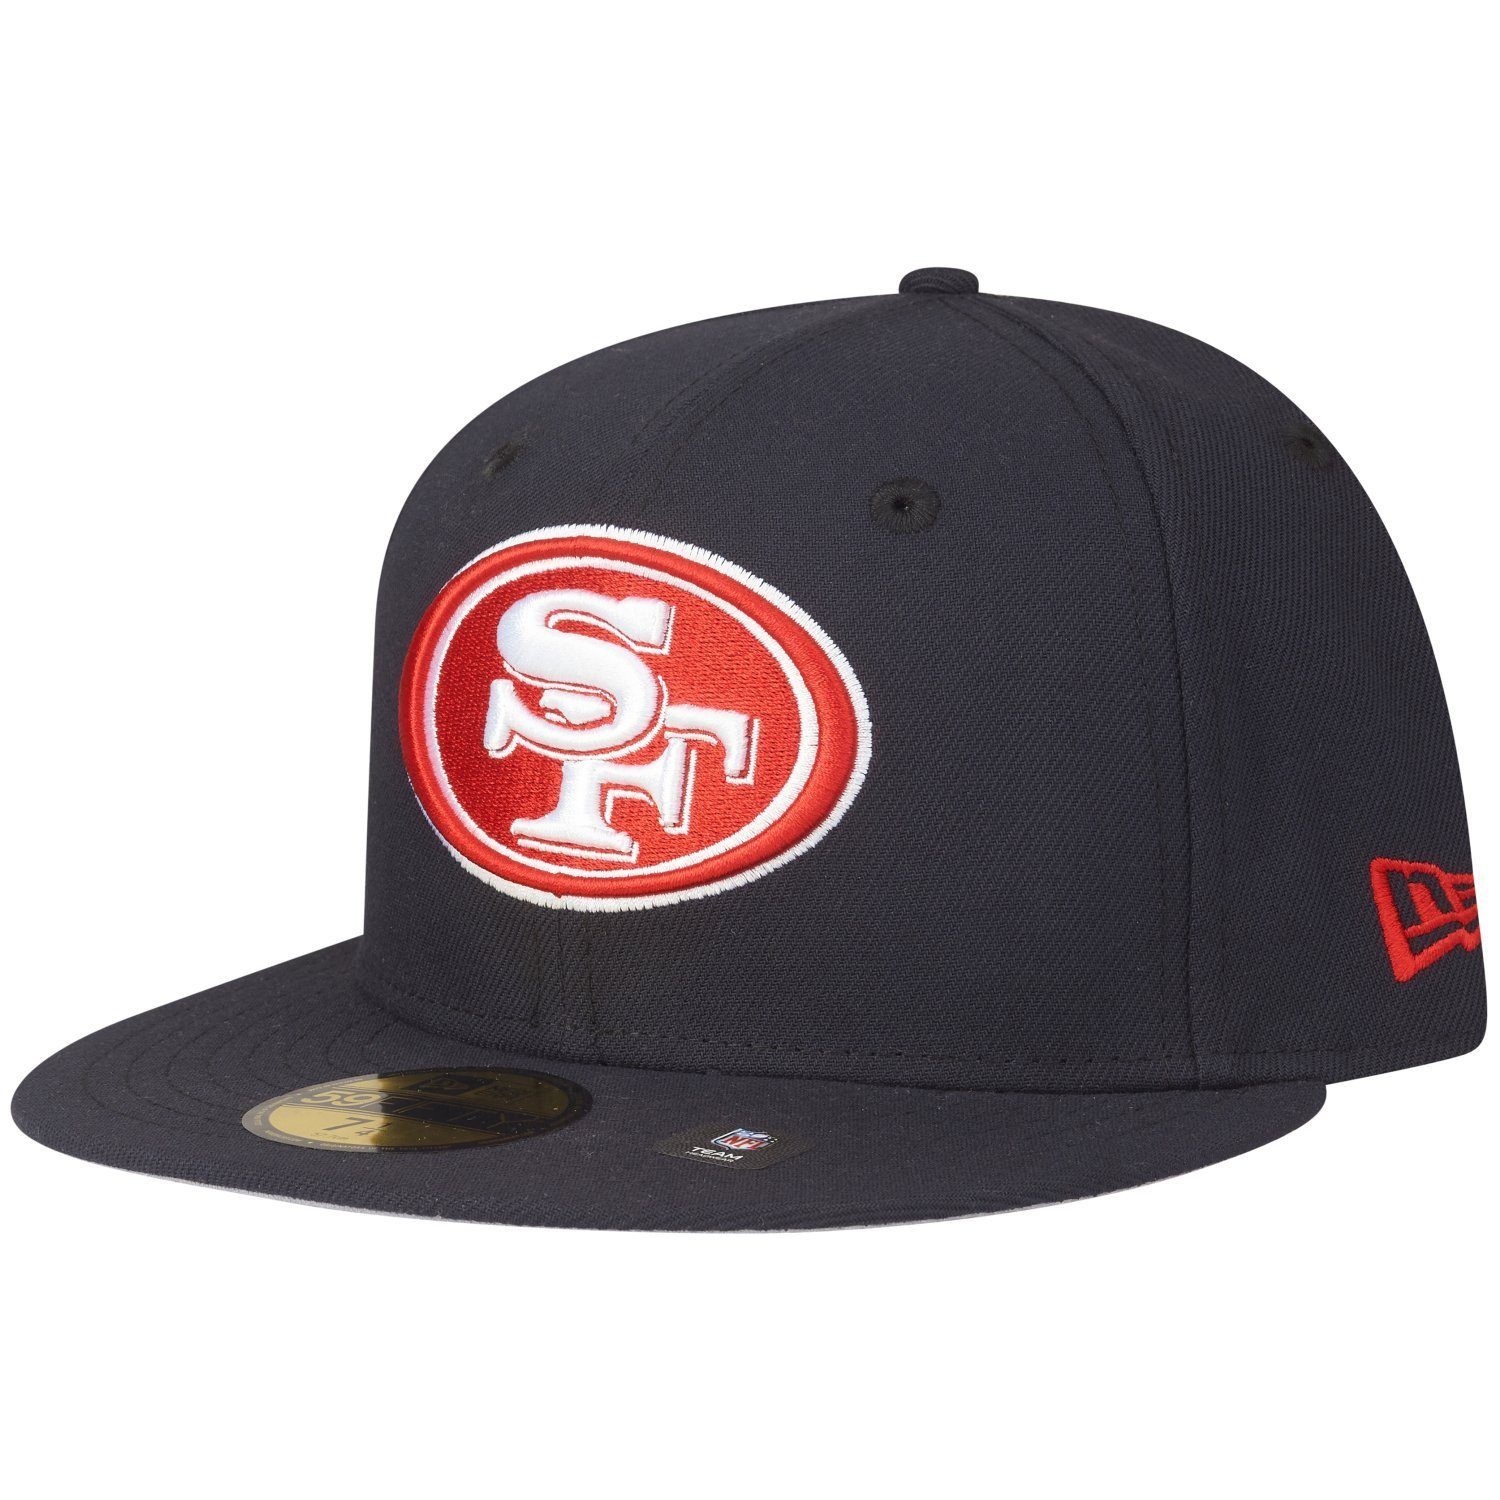 New Era Fitted Cap 59Fifty NFL TEAMS red San Francisco 49ers